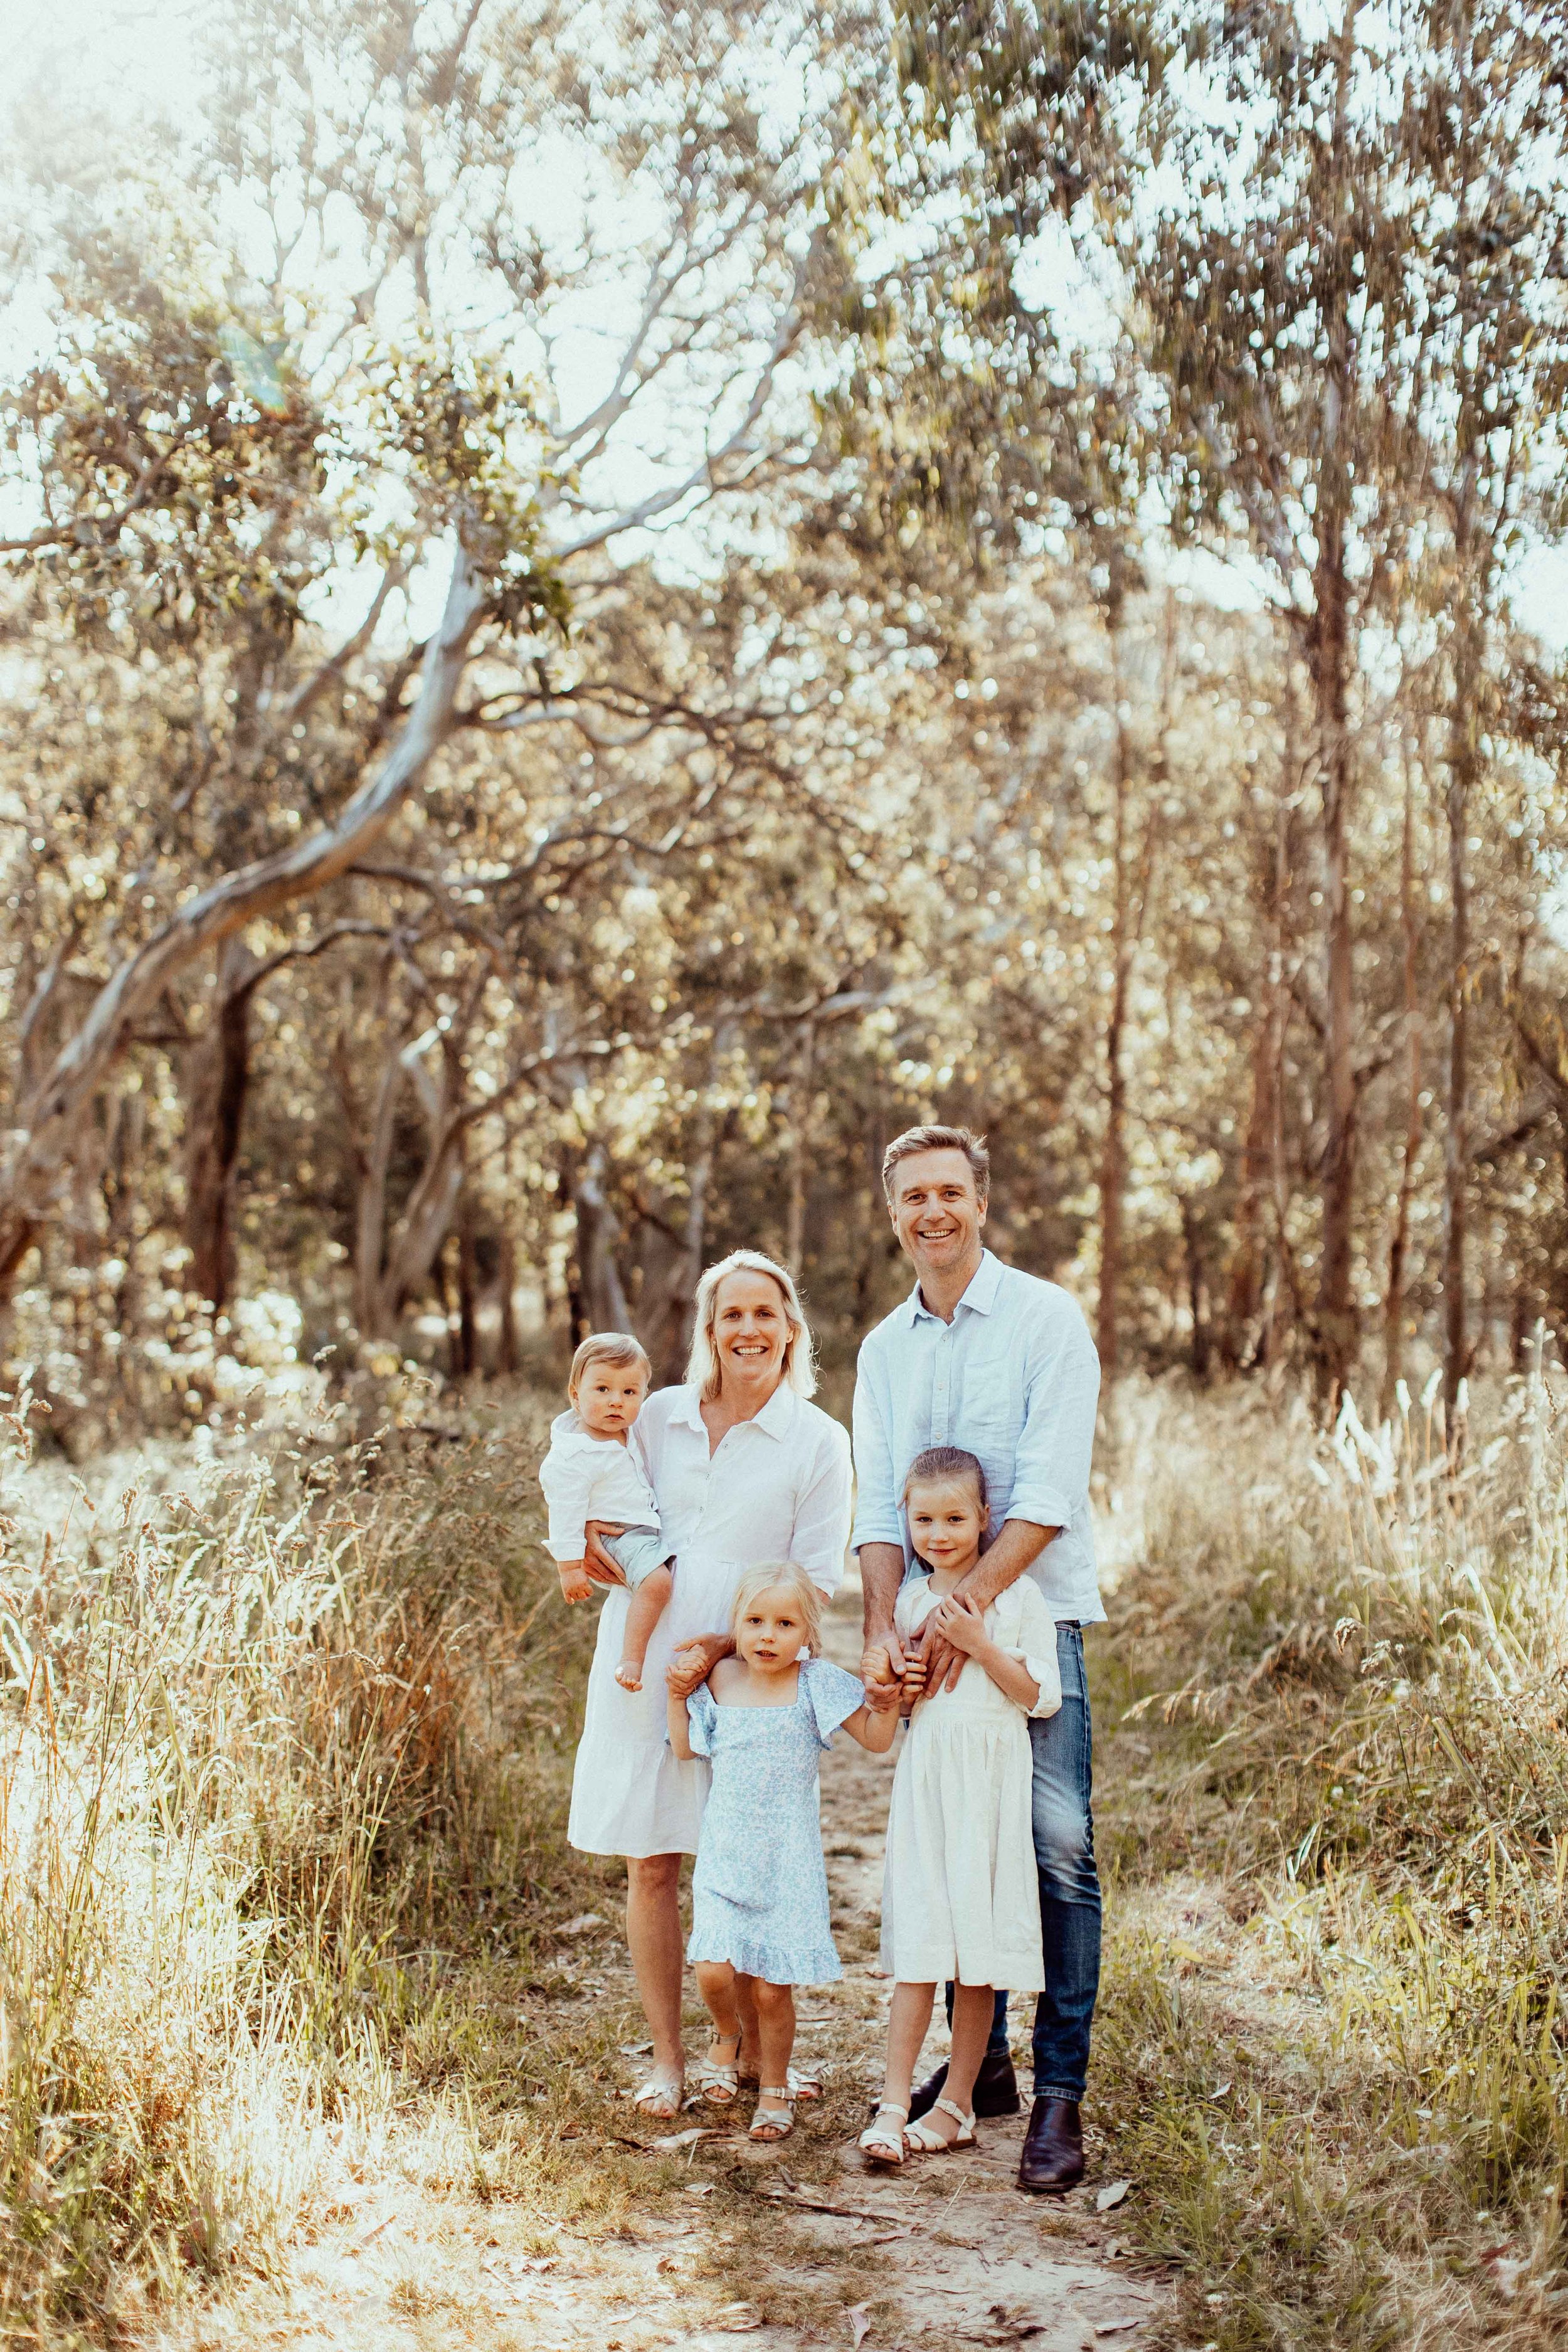 poole-family-bowral-southern-highlands-inhome-family-lifestyle-wollondilly-camden-macarthur-sydney-photography-www.emilyobrienphotography.net-37.jpg